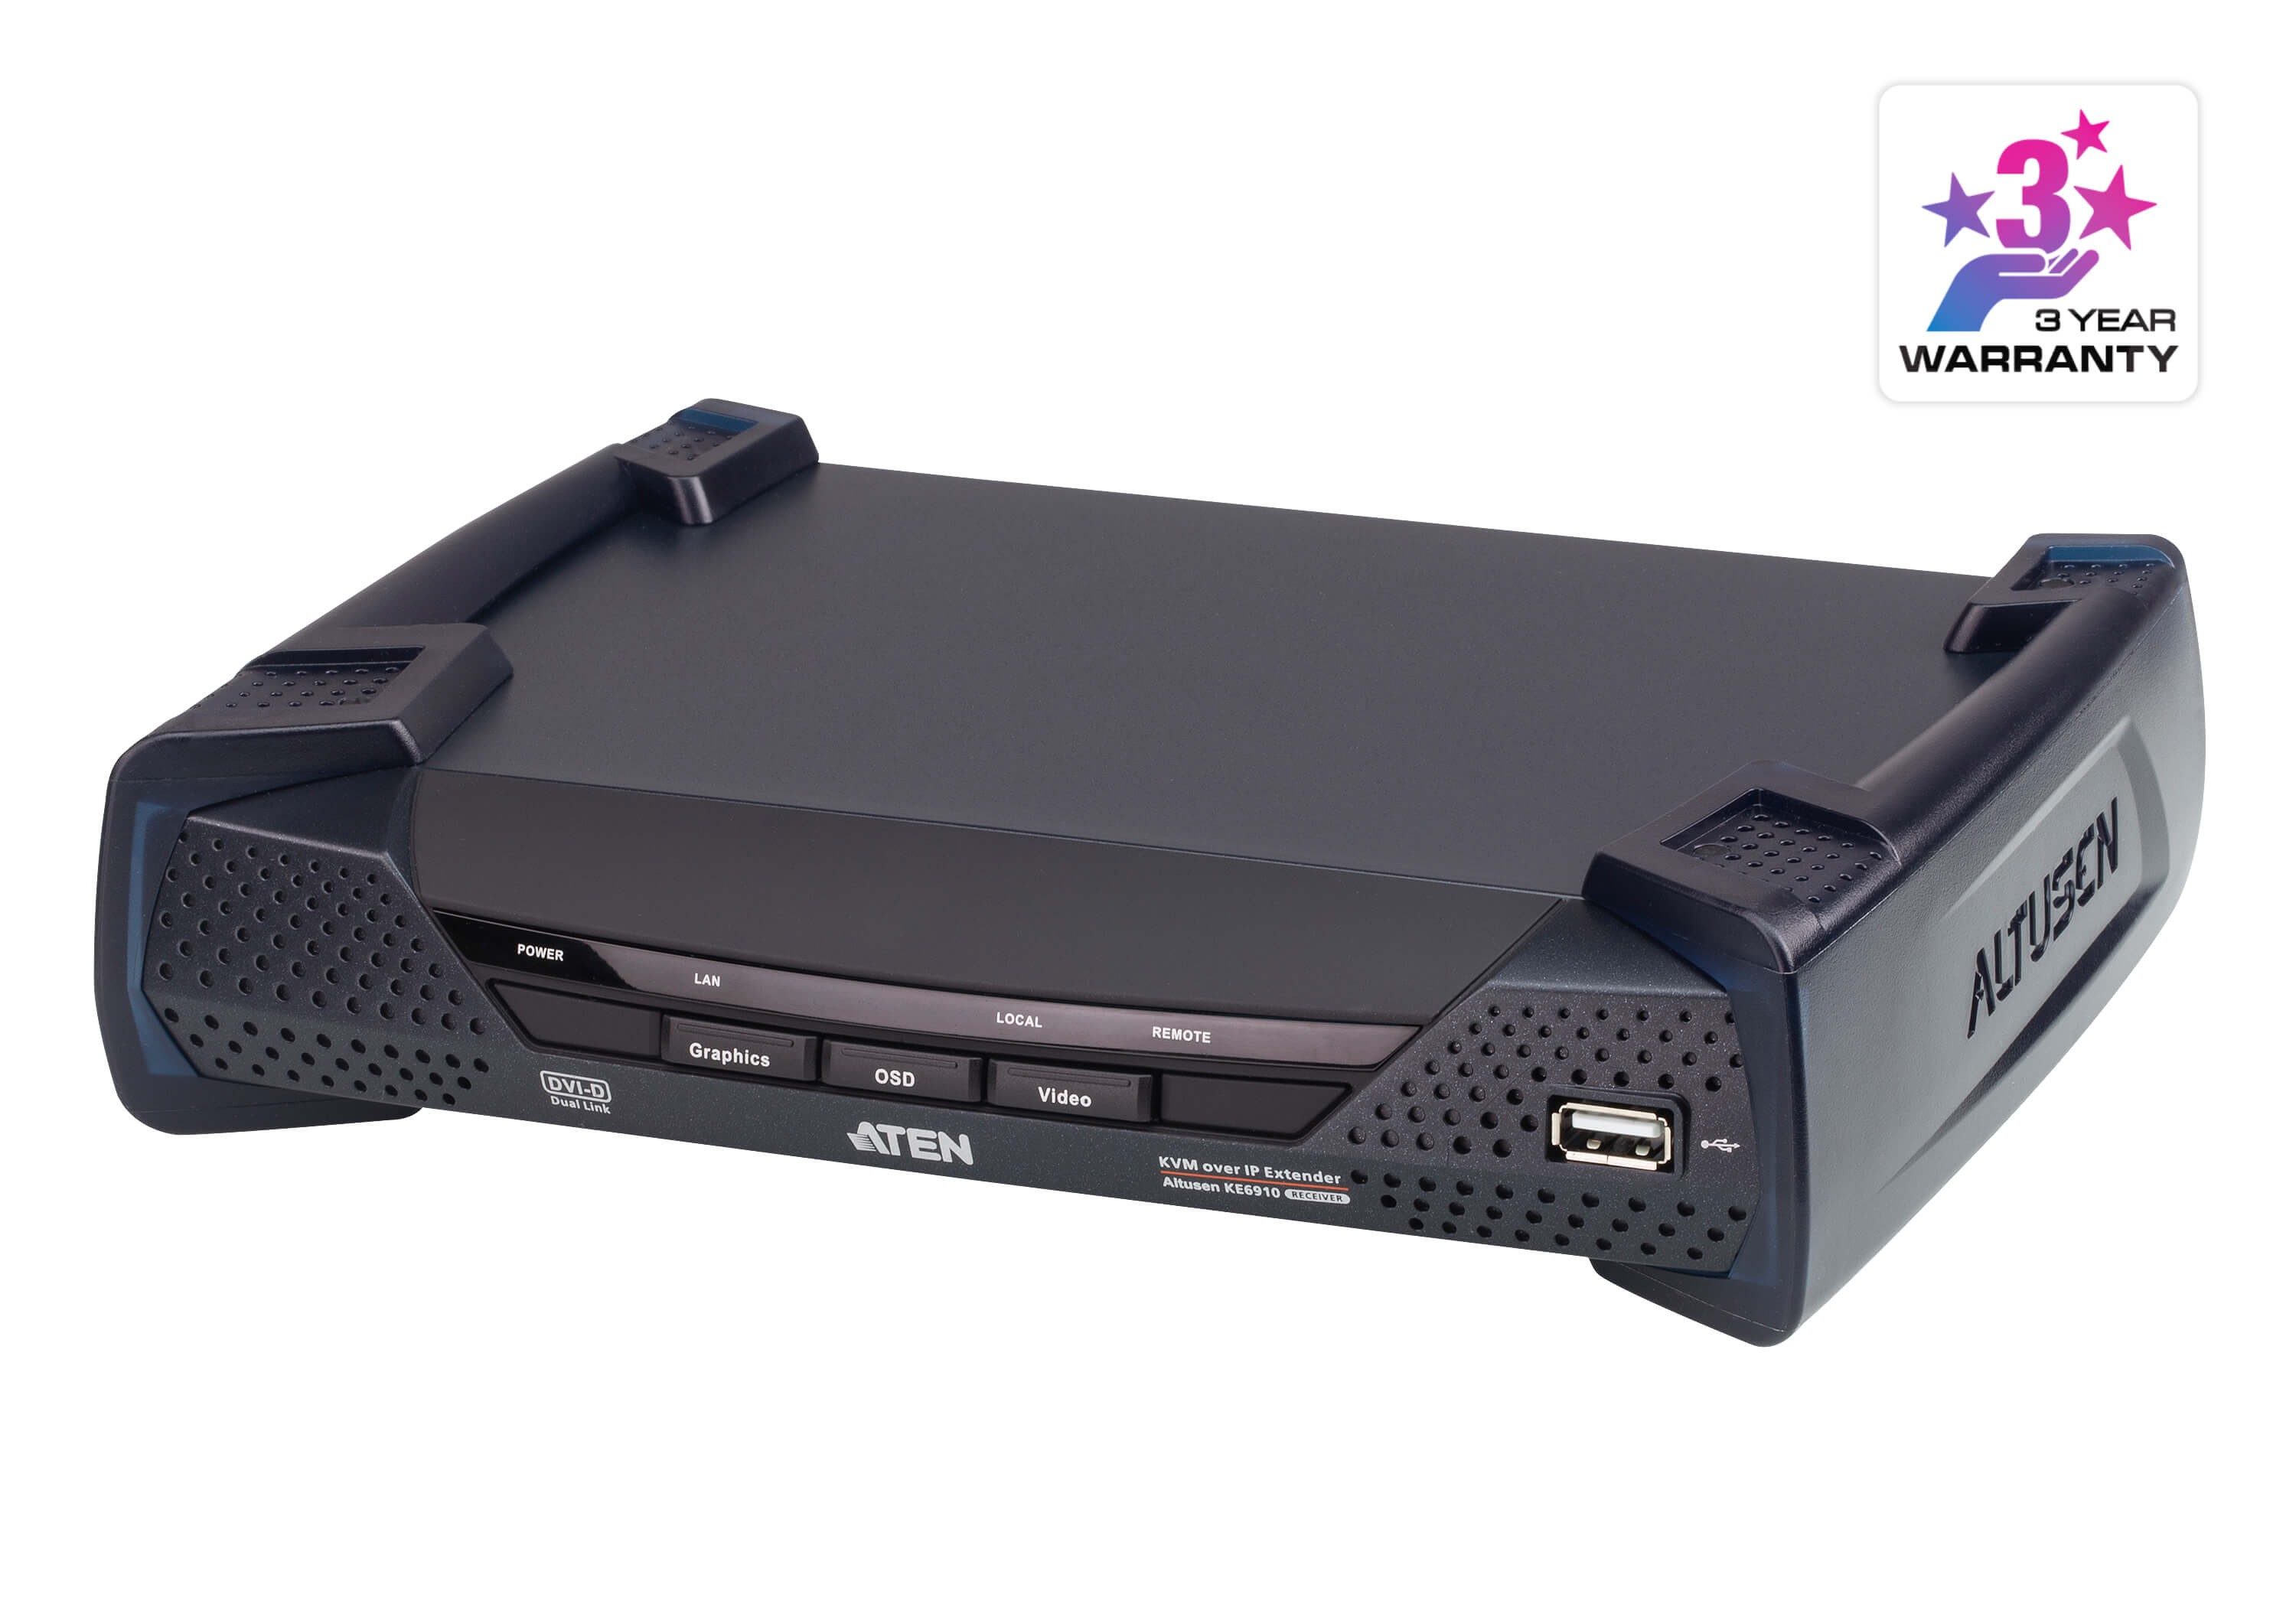 KE6910R  USB 2K DVI-D Dual Link KVM over IP Receiver with USB Peripheral Support, Power/LAN Redundancy (SFP Slot), RS-232 Control and Aud